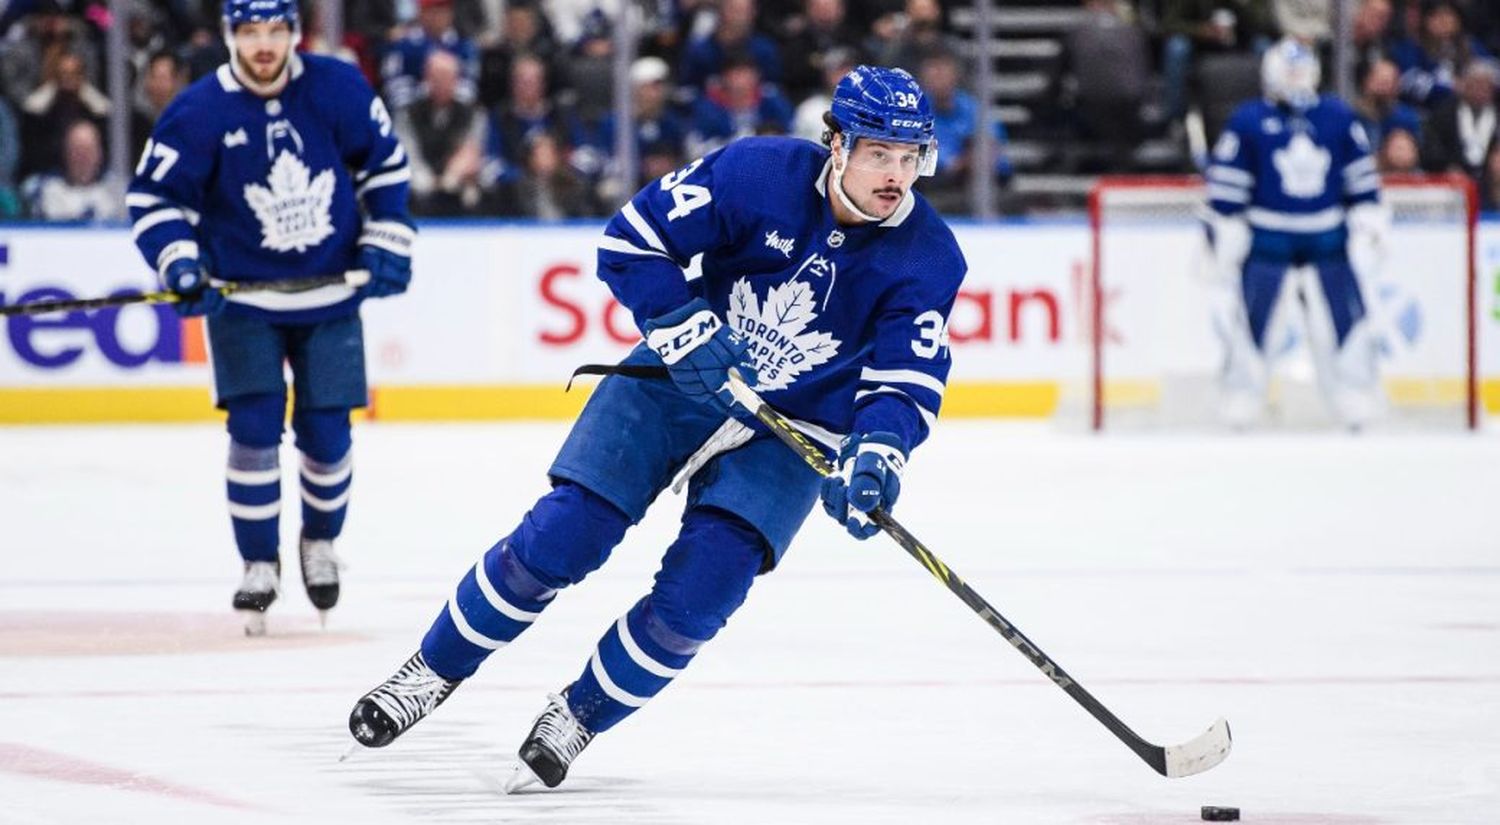 Auston Matthews, the Maple Leafs' star, has his sights set on the 'Rocket' Richard Trophy after reaching the 100-point milestone